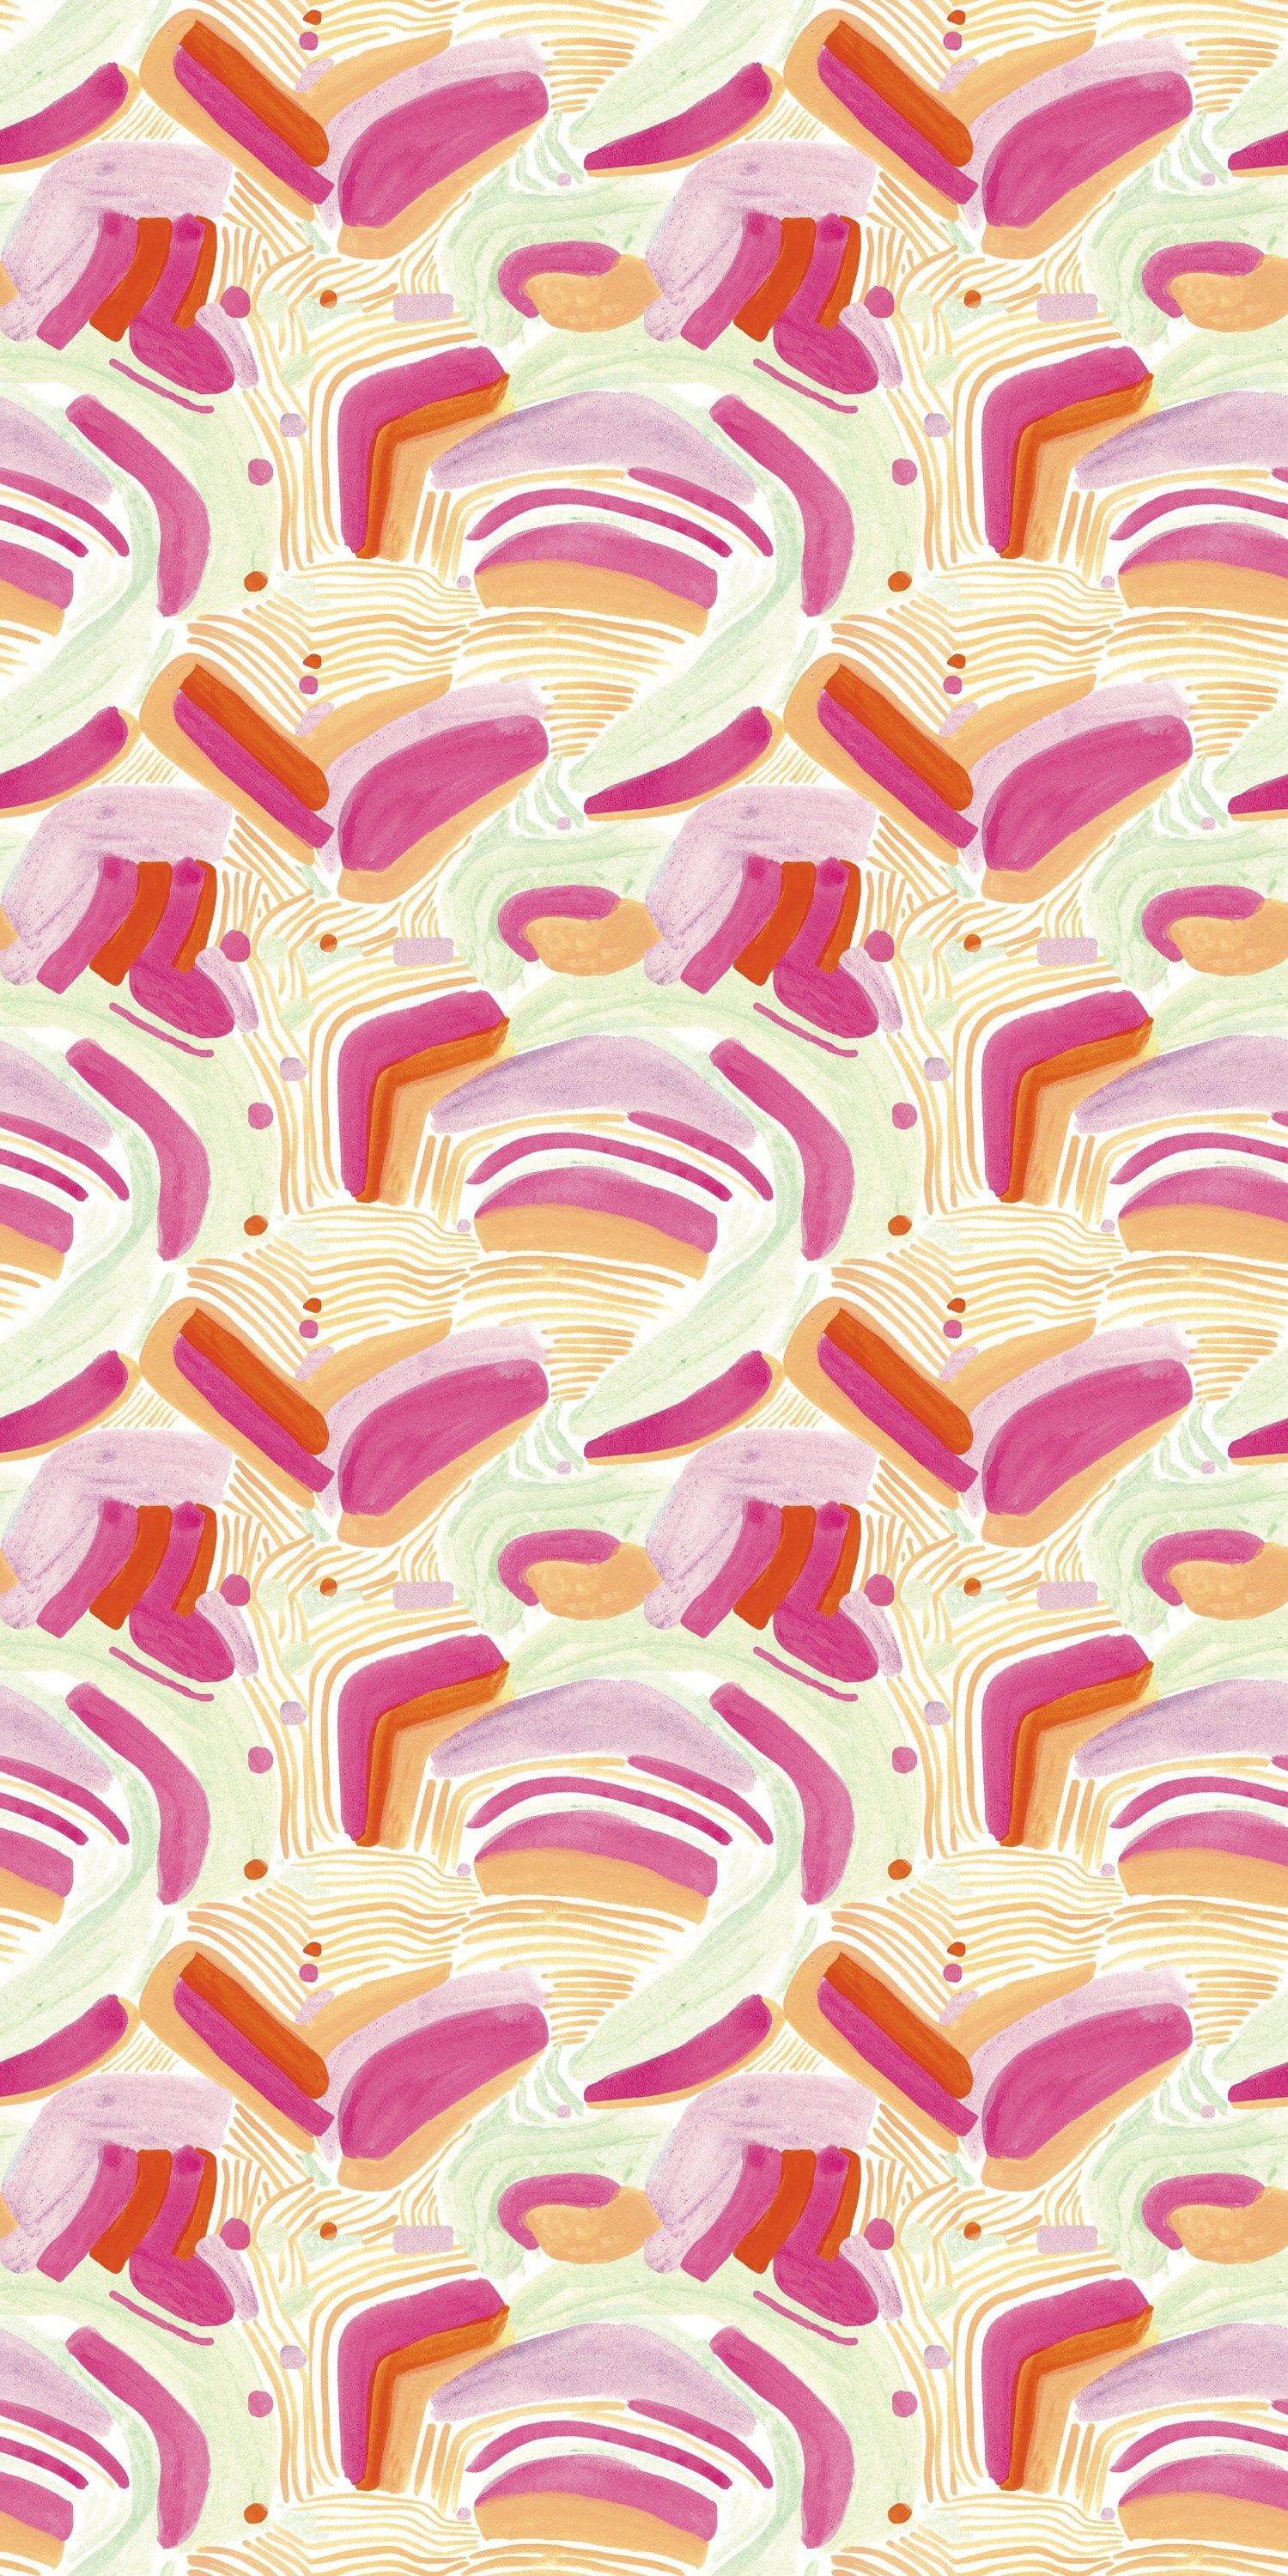 A pattern of curved lines in pink, orange, and red against a cream background - Bright